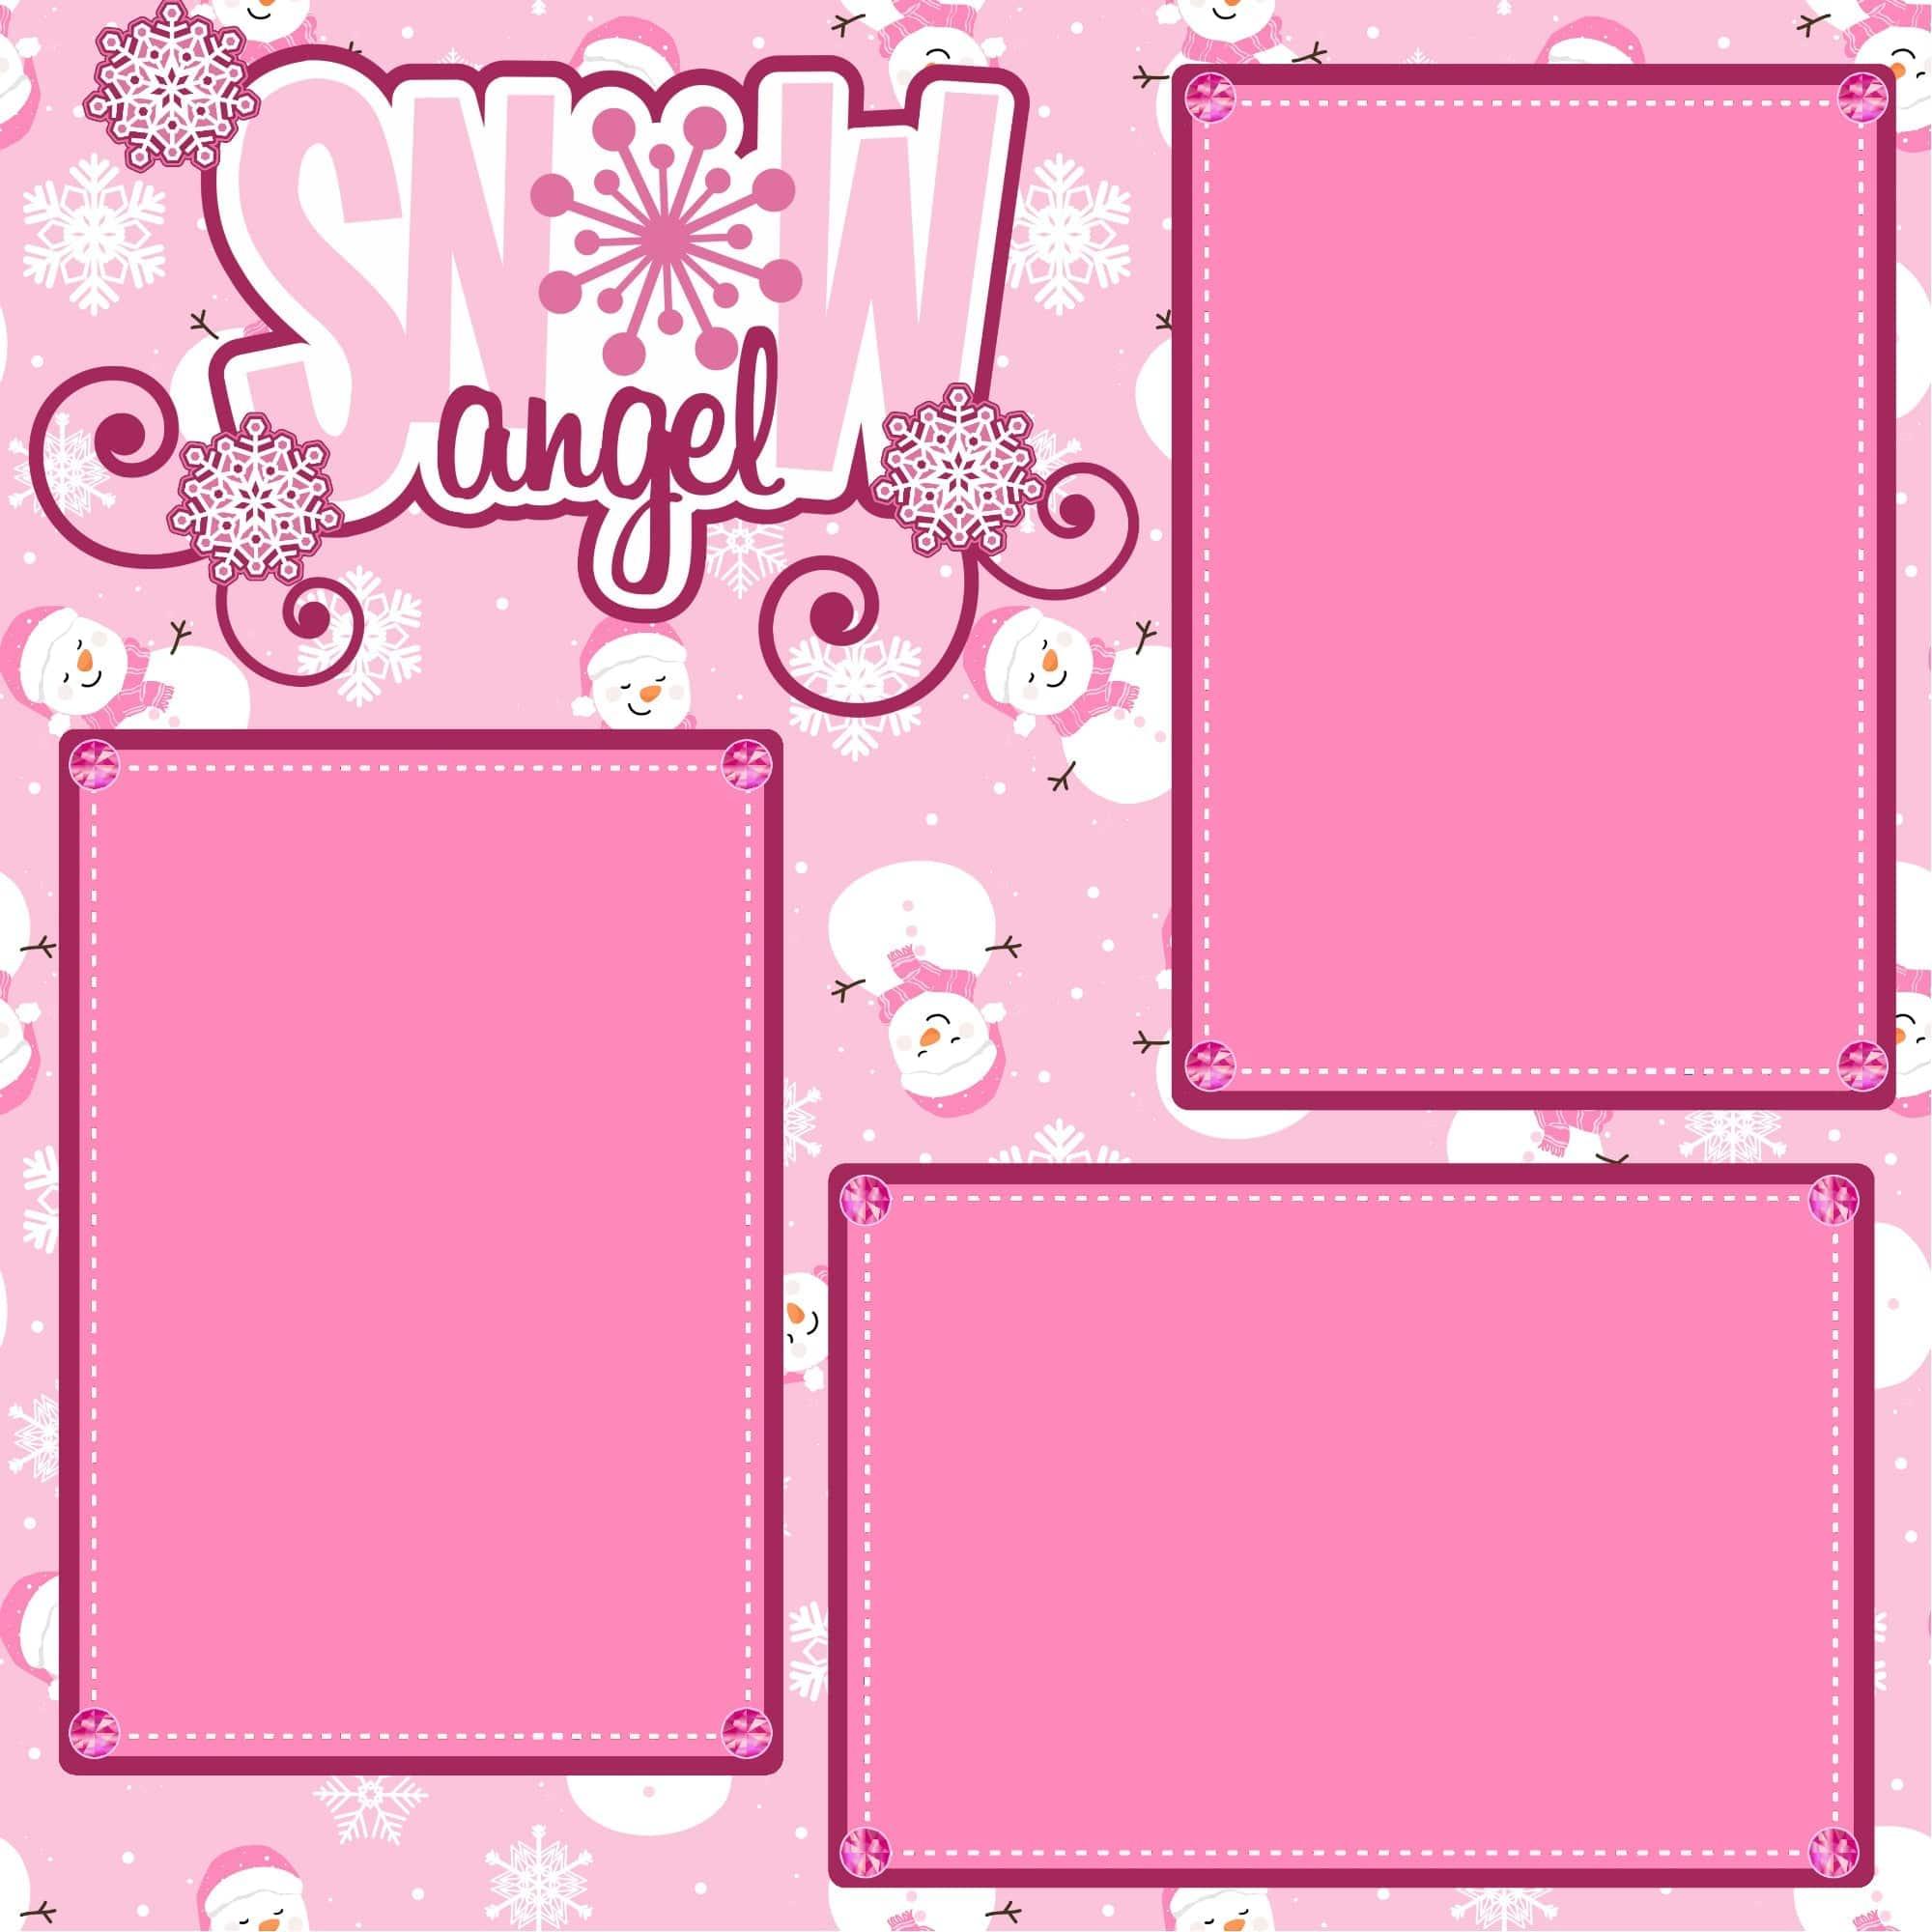 Snow Angel Girl (2) - 12 x 12 Premade, Printed Scrapbook Pages by SSC Designs - Scrapbook Supply Companies